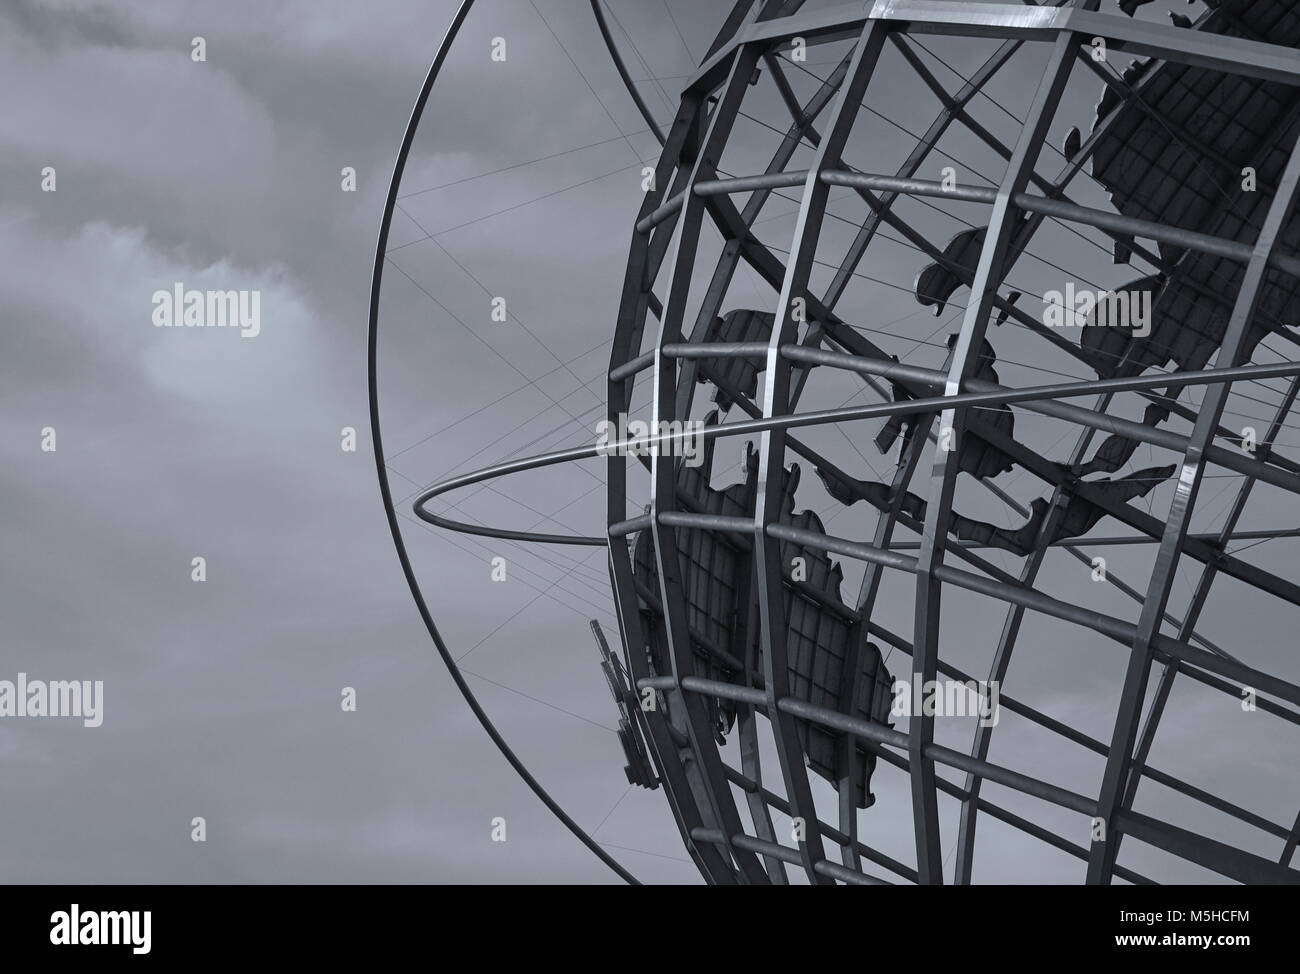 The Unisphere, Flushing Meadows–Corona Park, Queens, New York, USA. An iconic monument located in the Borough of Queens, New York City, NY. Stock Photo